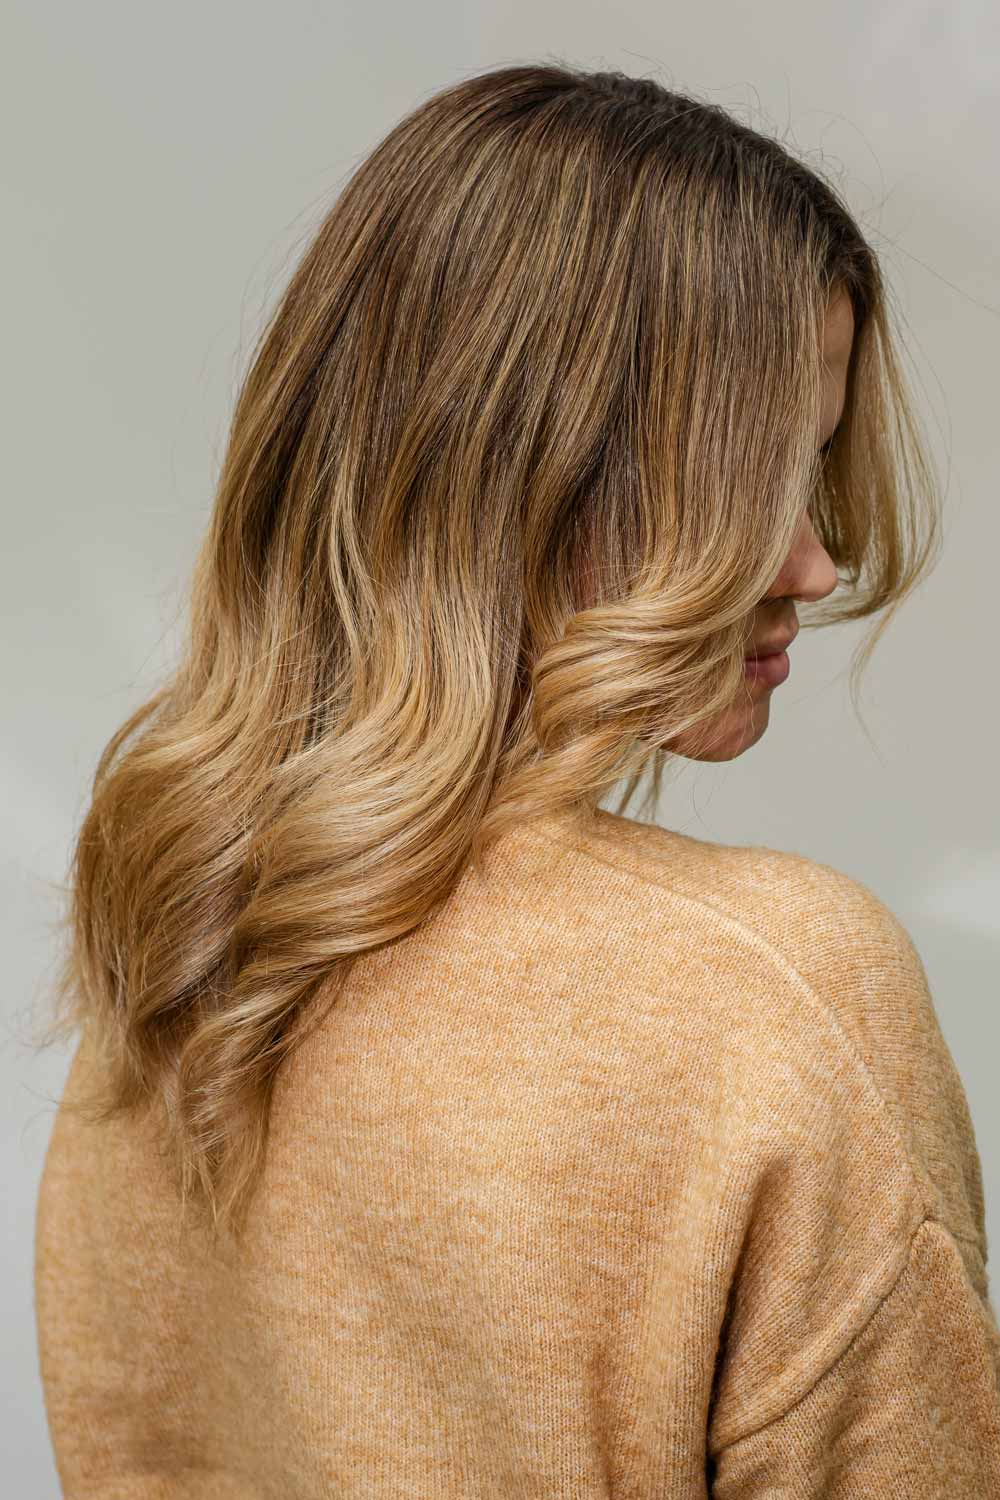 Ombre hair creates a more noticeable contrast between the dark and light colors, resulting in a bolder, more striking appearance